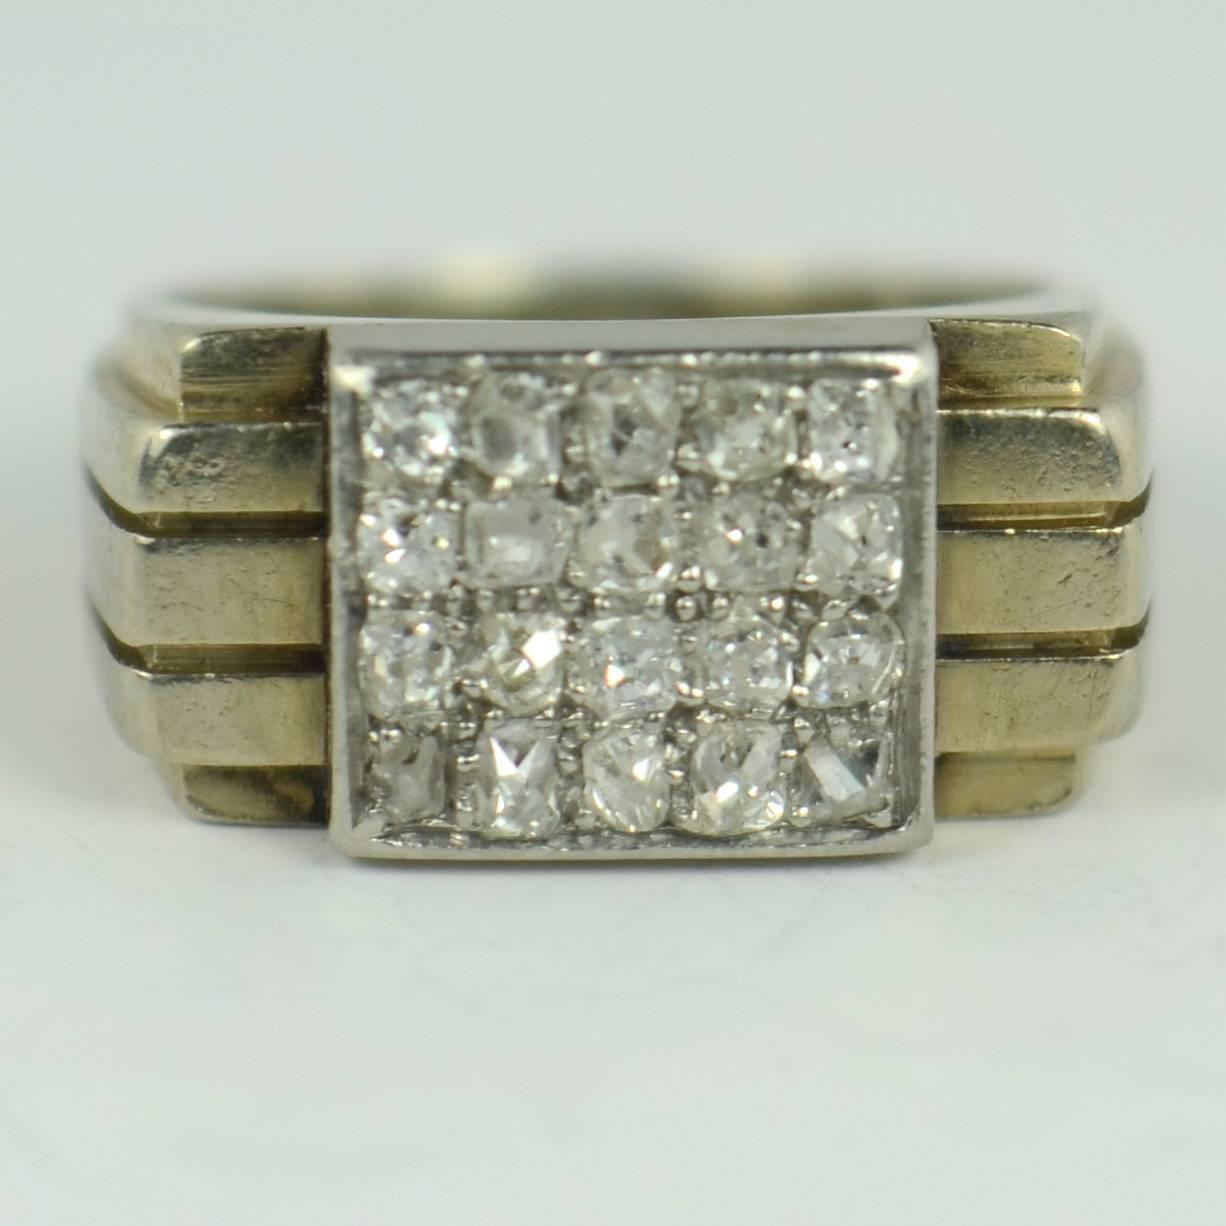 A French ring circa 1930 with an 18 carat white gold tapering shank with geometric form and three raised ridges to a panel of platinum set with twenty old single cut diamonds with a total approximate weight of 0.50 carats.  

The ring is marked with